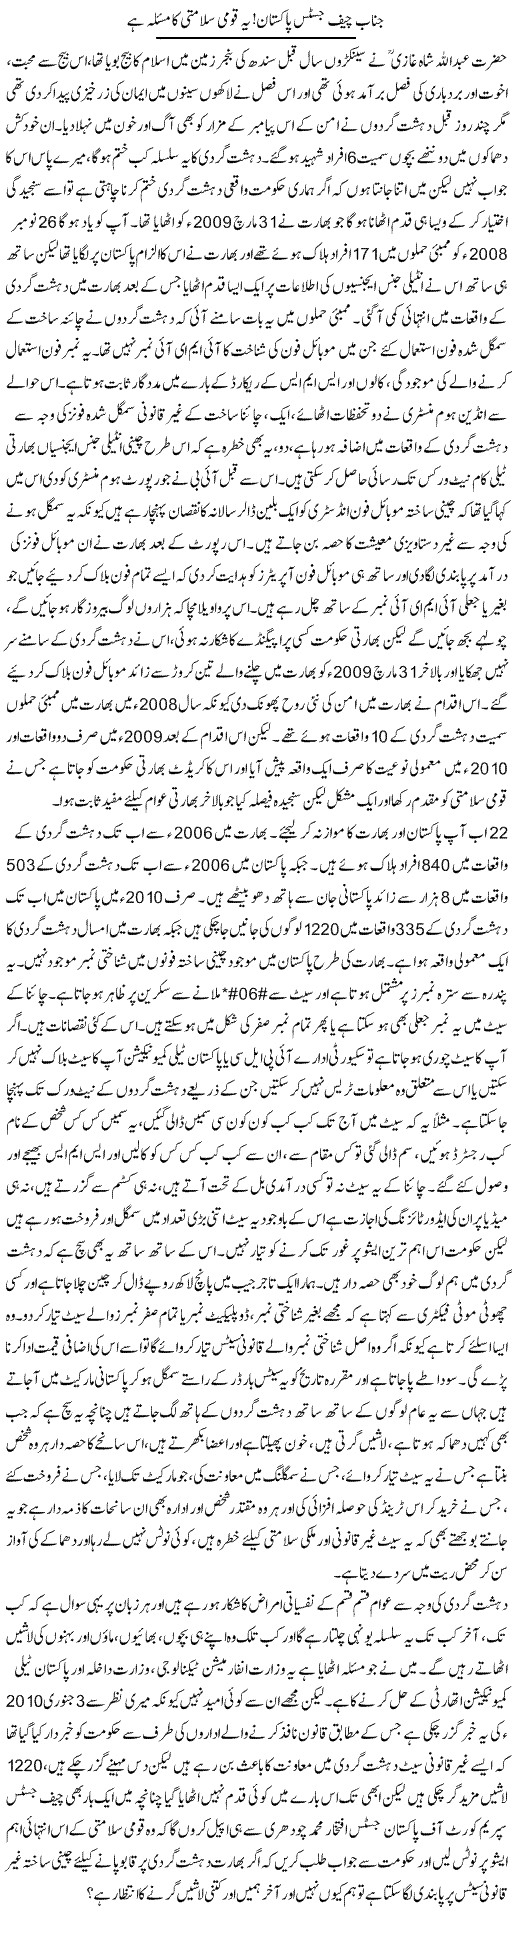 Mr Chief Justice Express Column Amad Chaudhry 10 October 2010